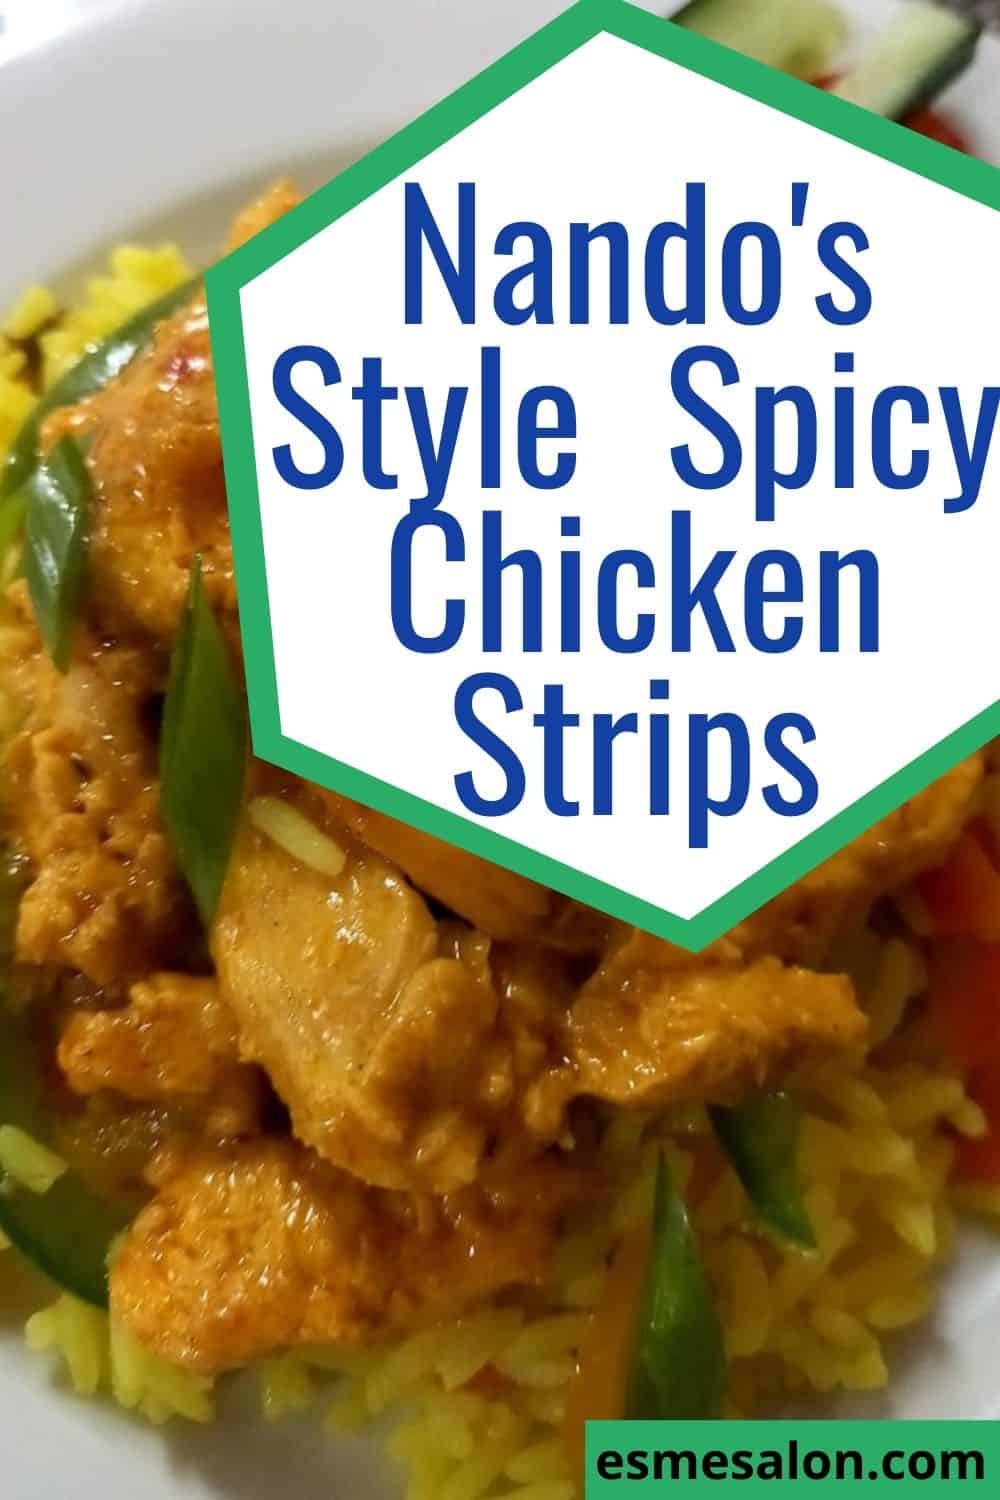 A bowl of Nando's Style Spicy Chicken Strips with yellow rice and slices spring onions